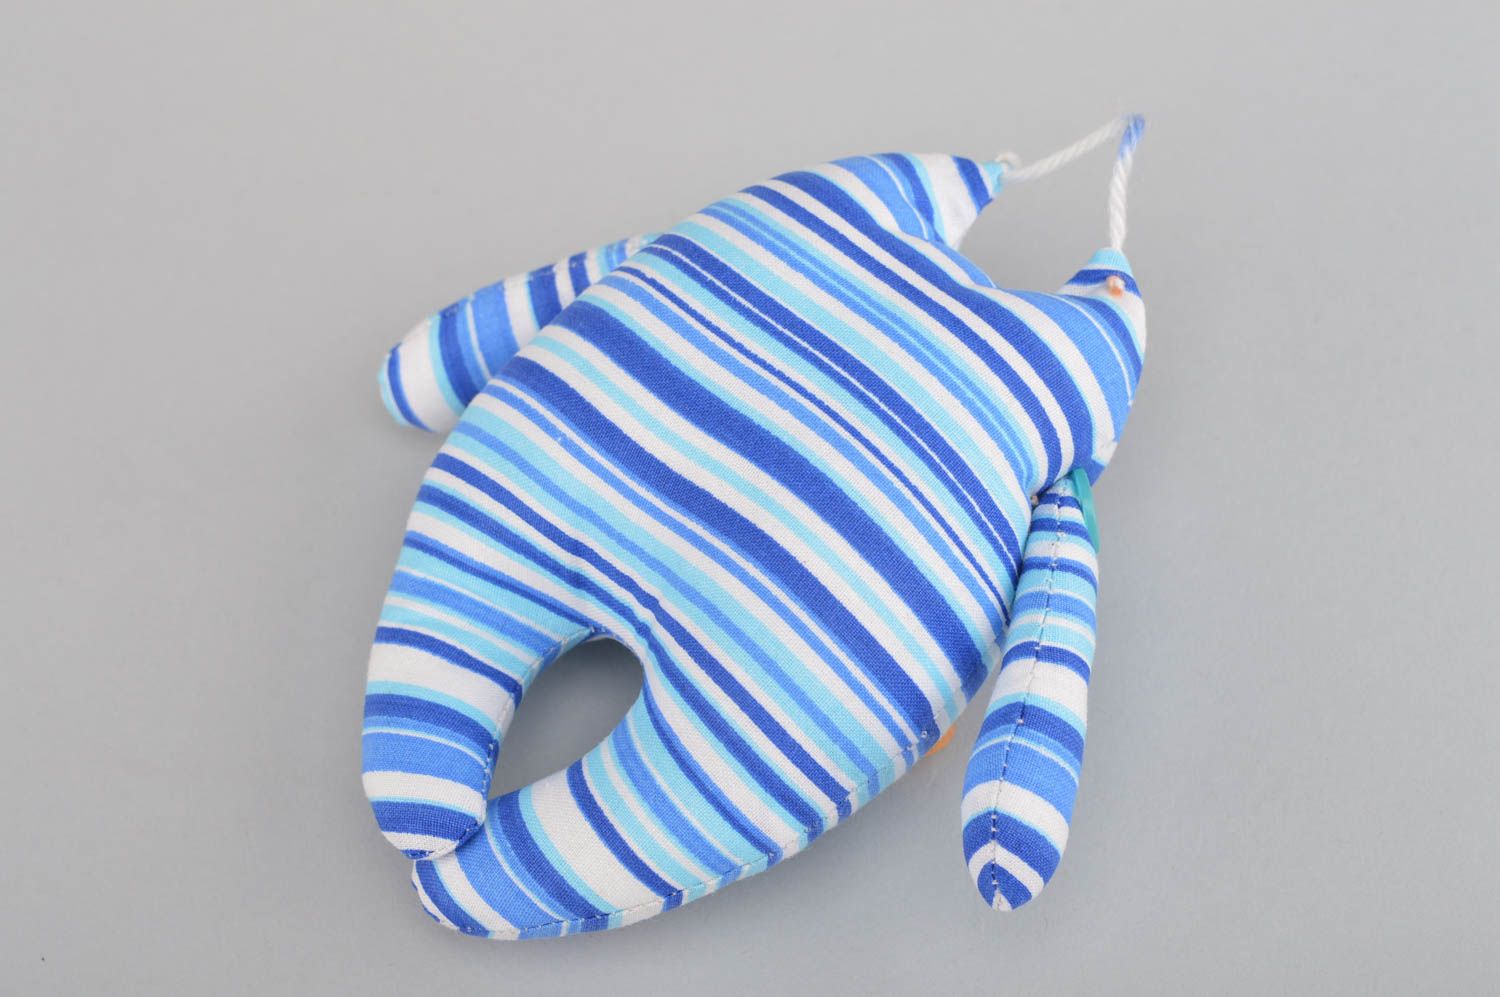 Beautiful childrens handmade fabric soft toy textile toy for kids nursery decor photo 3